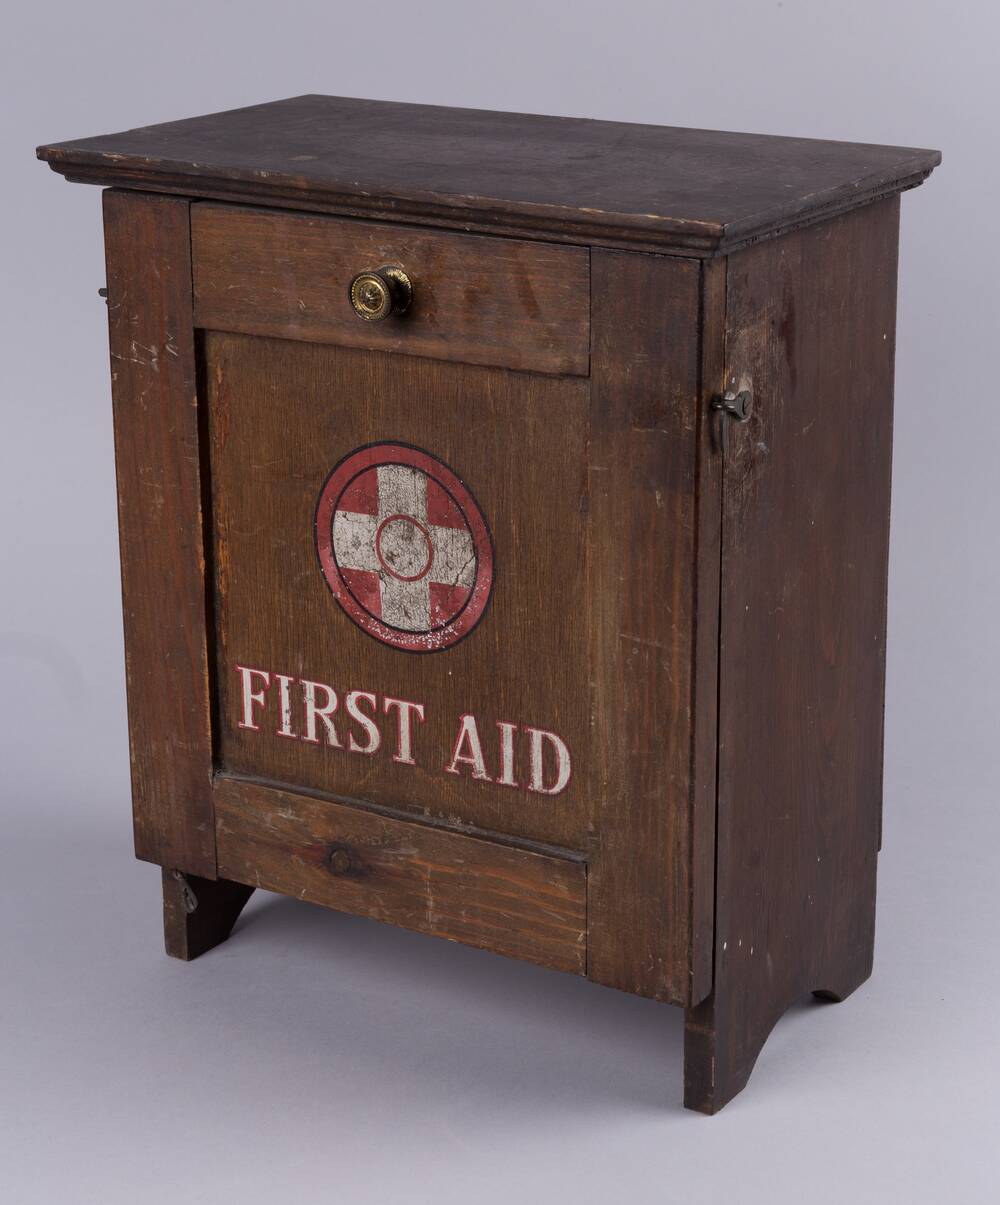 A small wooden cabinet has a white cross painted inside a red circle on the front door, above the words First Aid. There is also a small wooden drawer at the top with a brass handle.